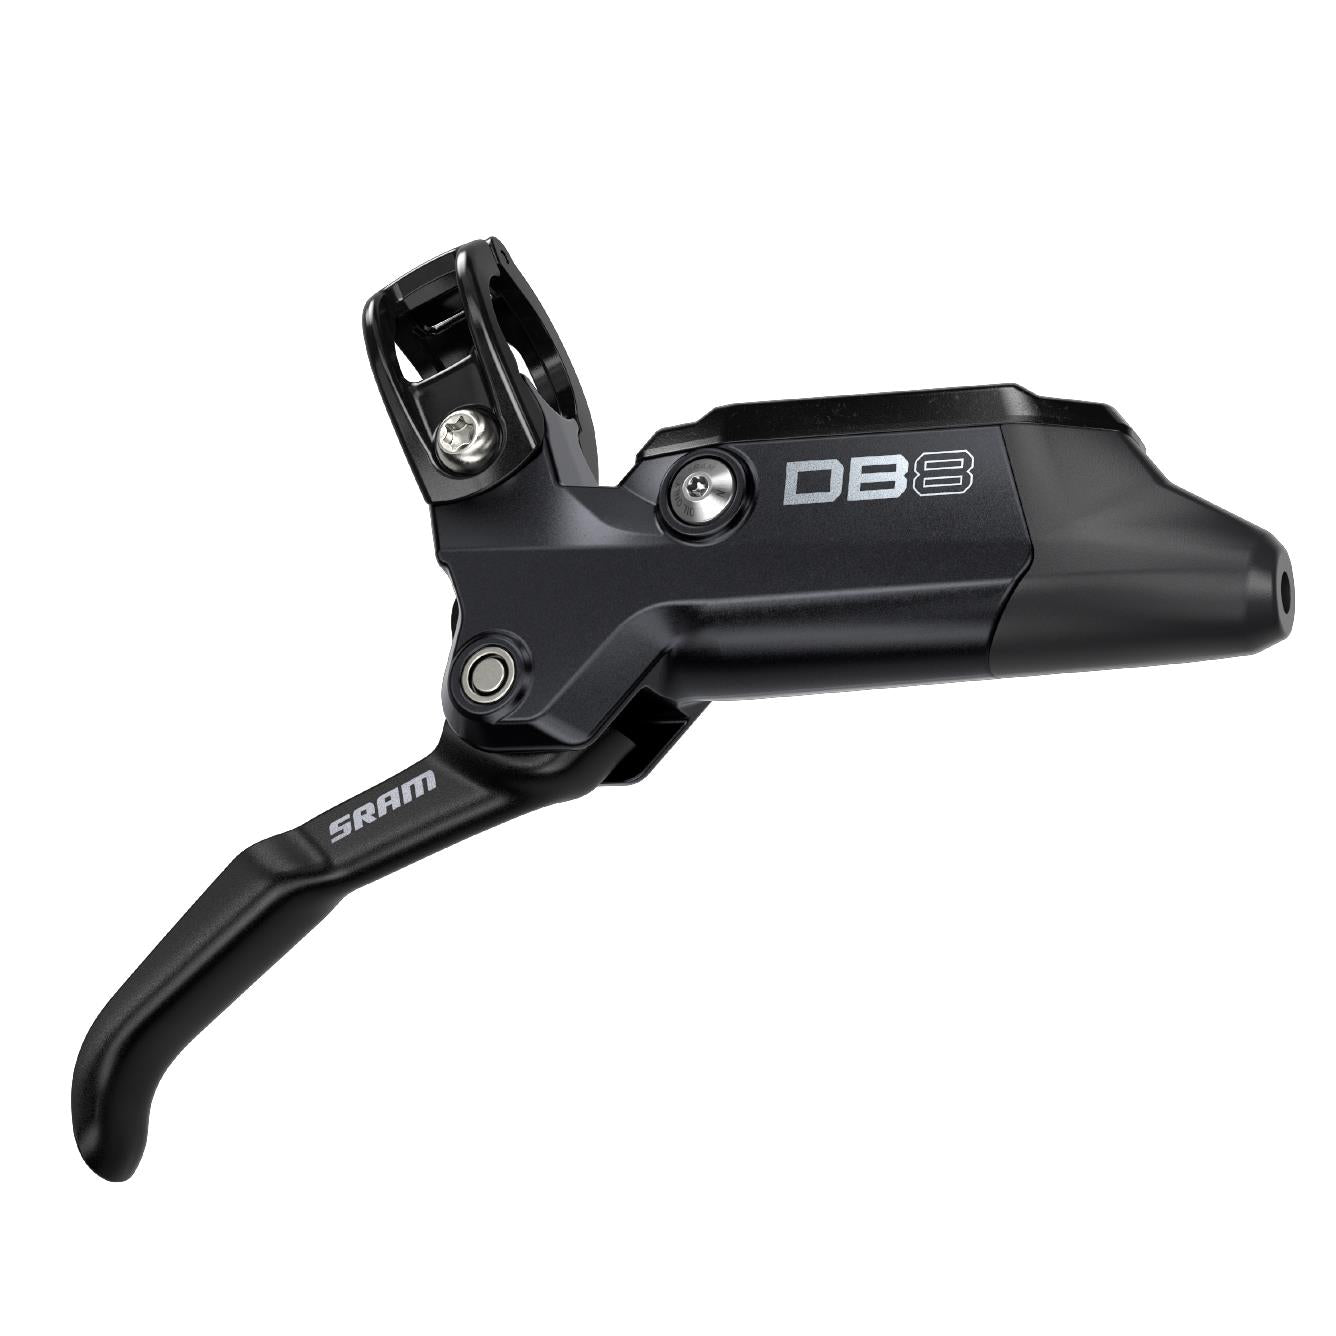 Sram Disc Brake Db8 - (Includes Mmx Clamp, Rotor/Bracket Sold Separately) - Mineral Oil Brake A1